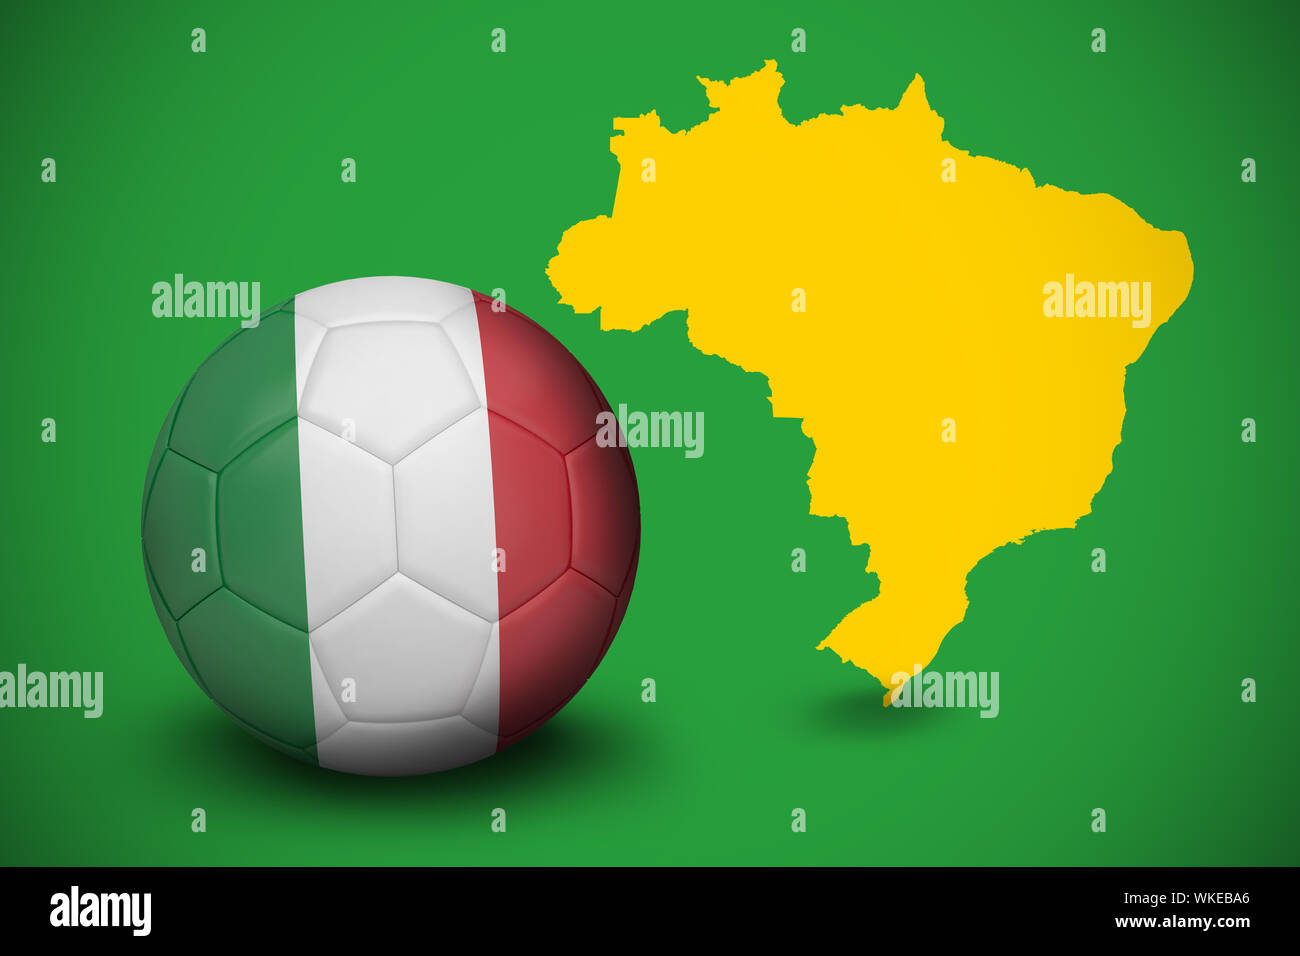 Football in italy colours against yellow brazil outline on green Stock Photo